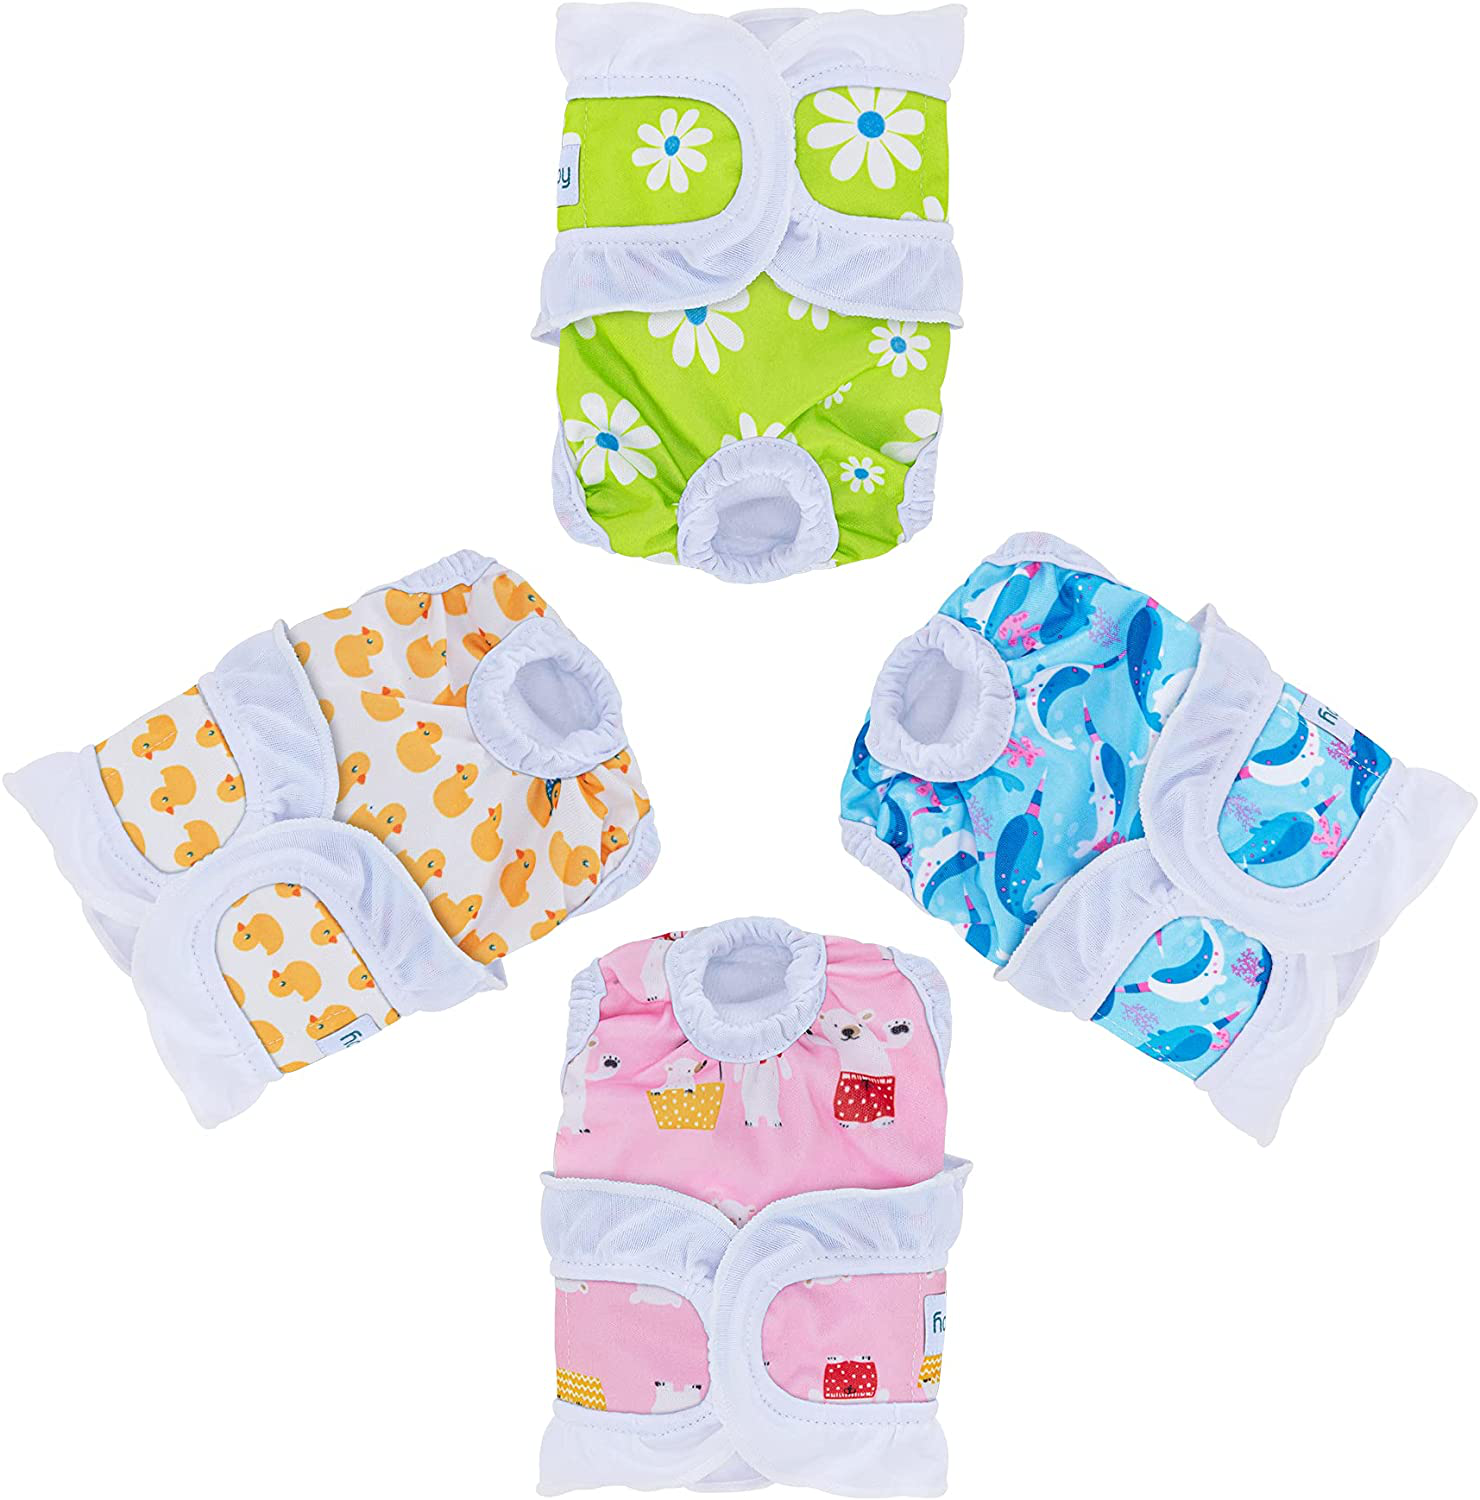 Teamoy Washable Female Dog Diapers(Pack of 4), Reusable Dog Incontinence Panties for Girl Dog in Period Heat